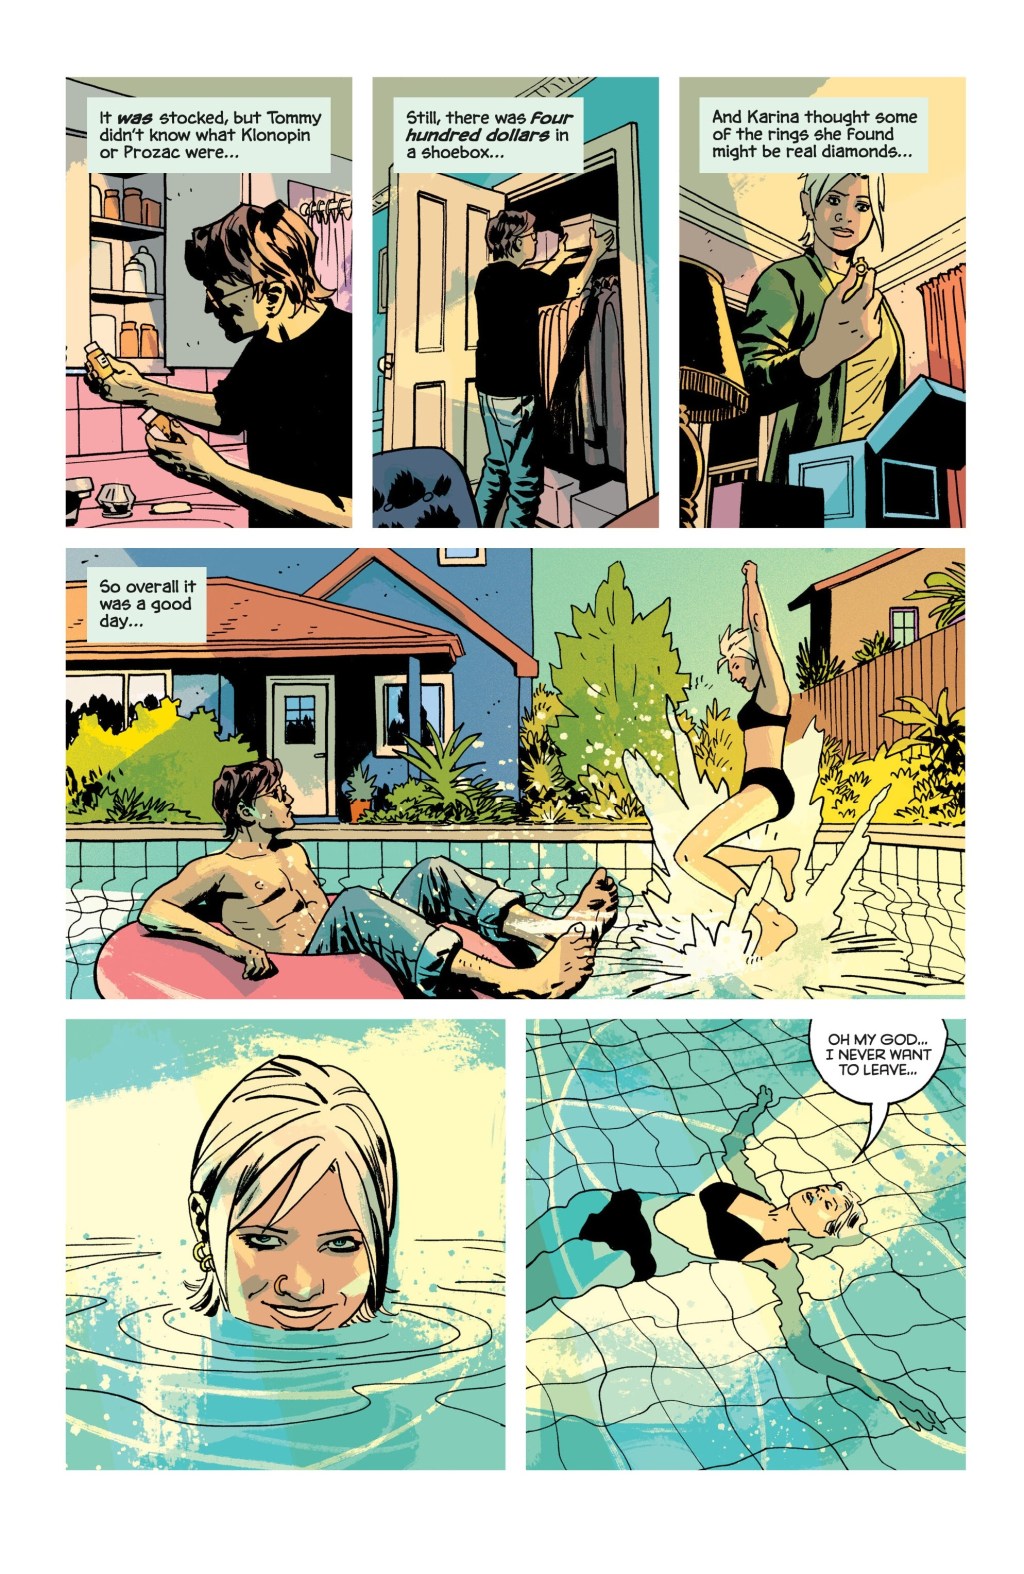 Where The Body Was (2023), Image Comics. Words by Ed Brubaker. Art by Sean Phillips